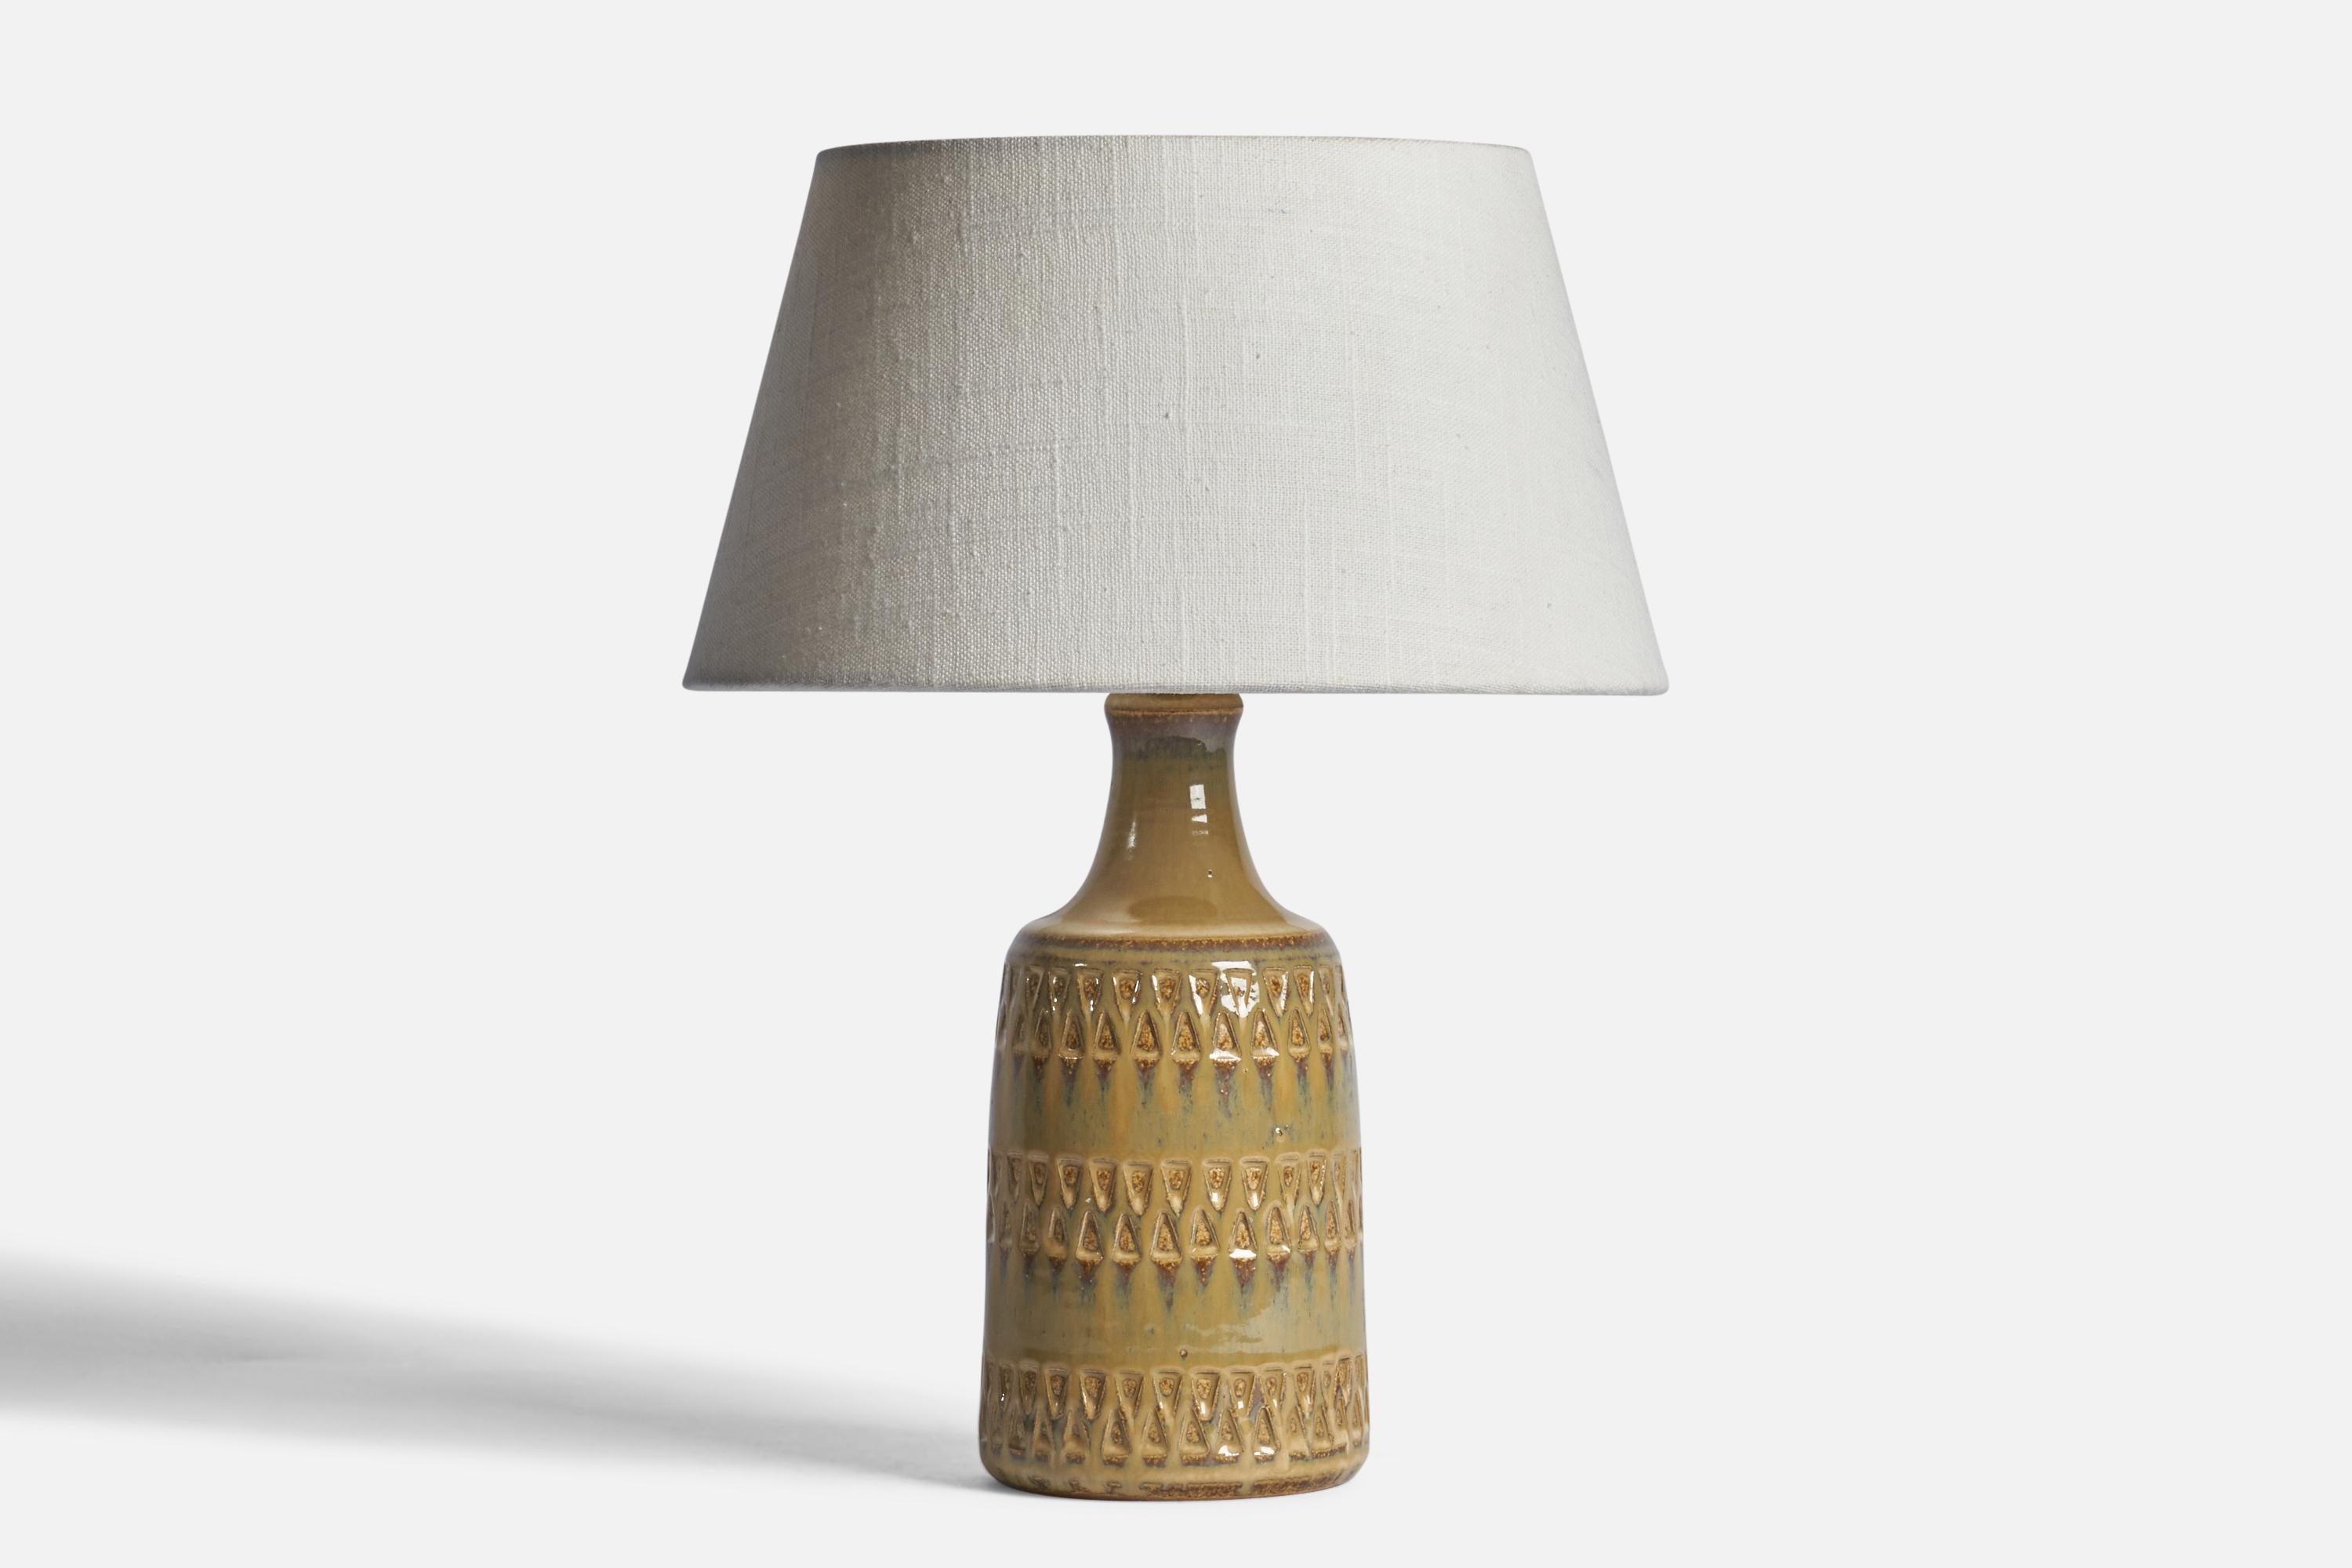 A yellow-glazed stoneware table lamp designed and produced by 
Søholm, Bornholm, Denmark, 1960s.

Dimensions of Lamp (inches): 10.5